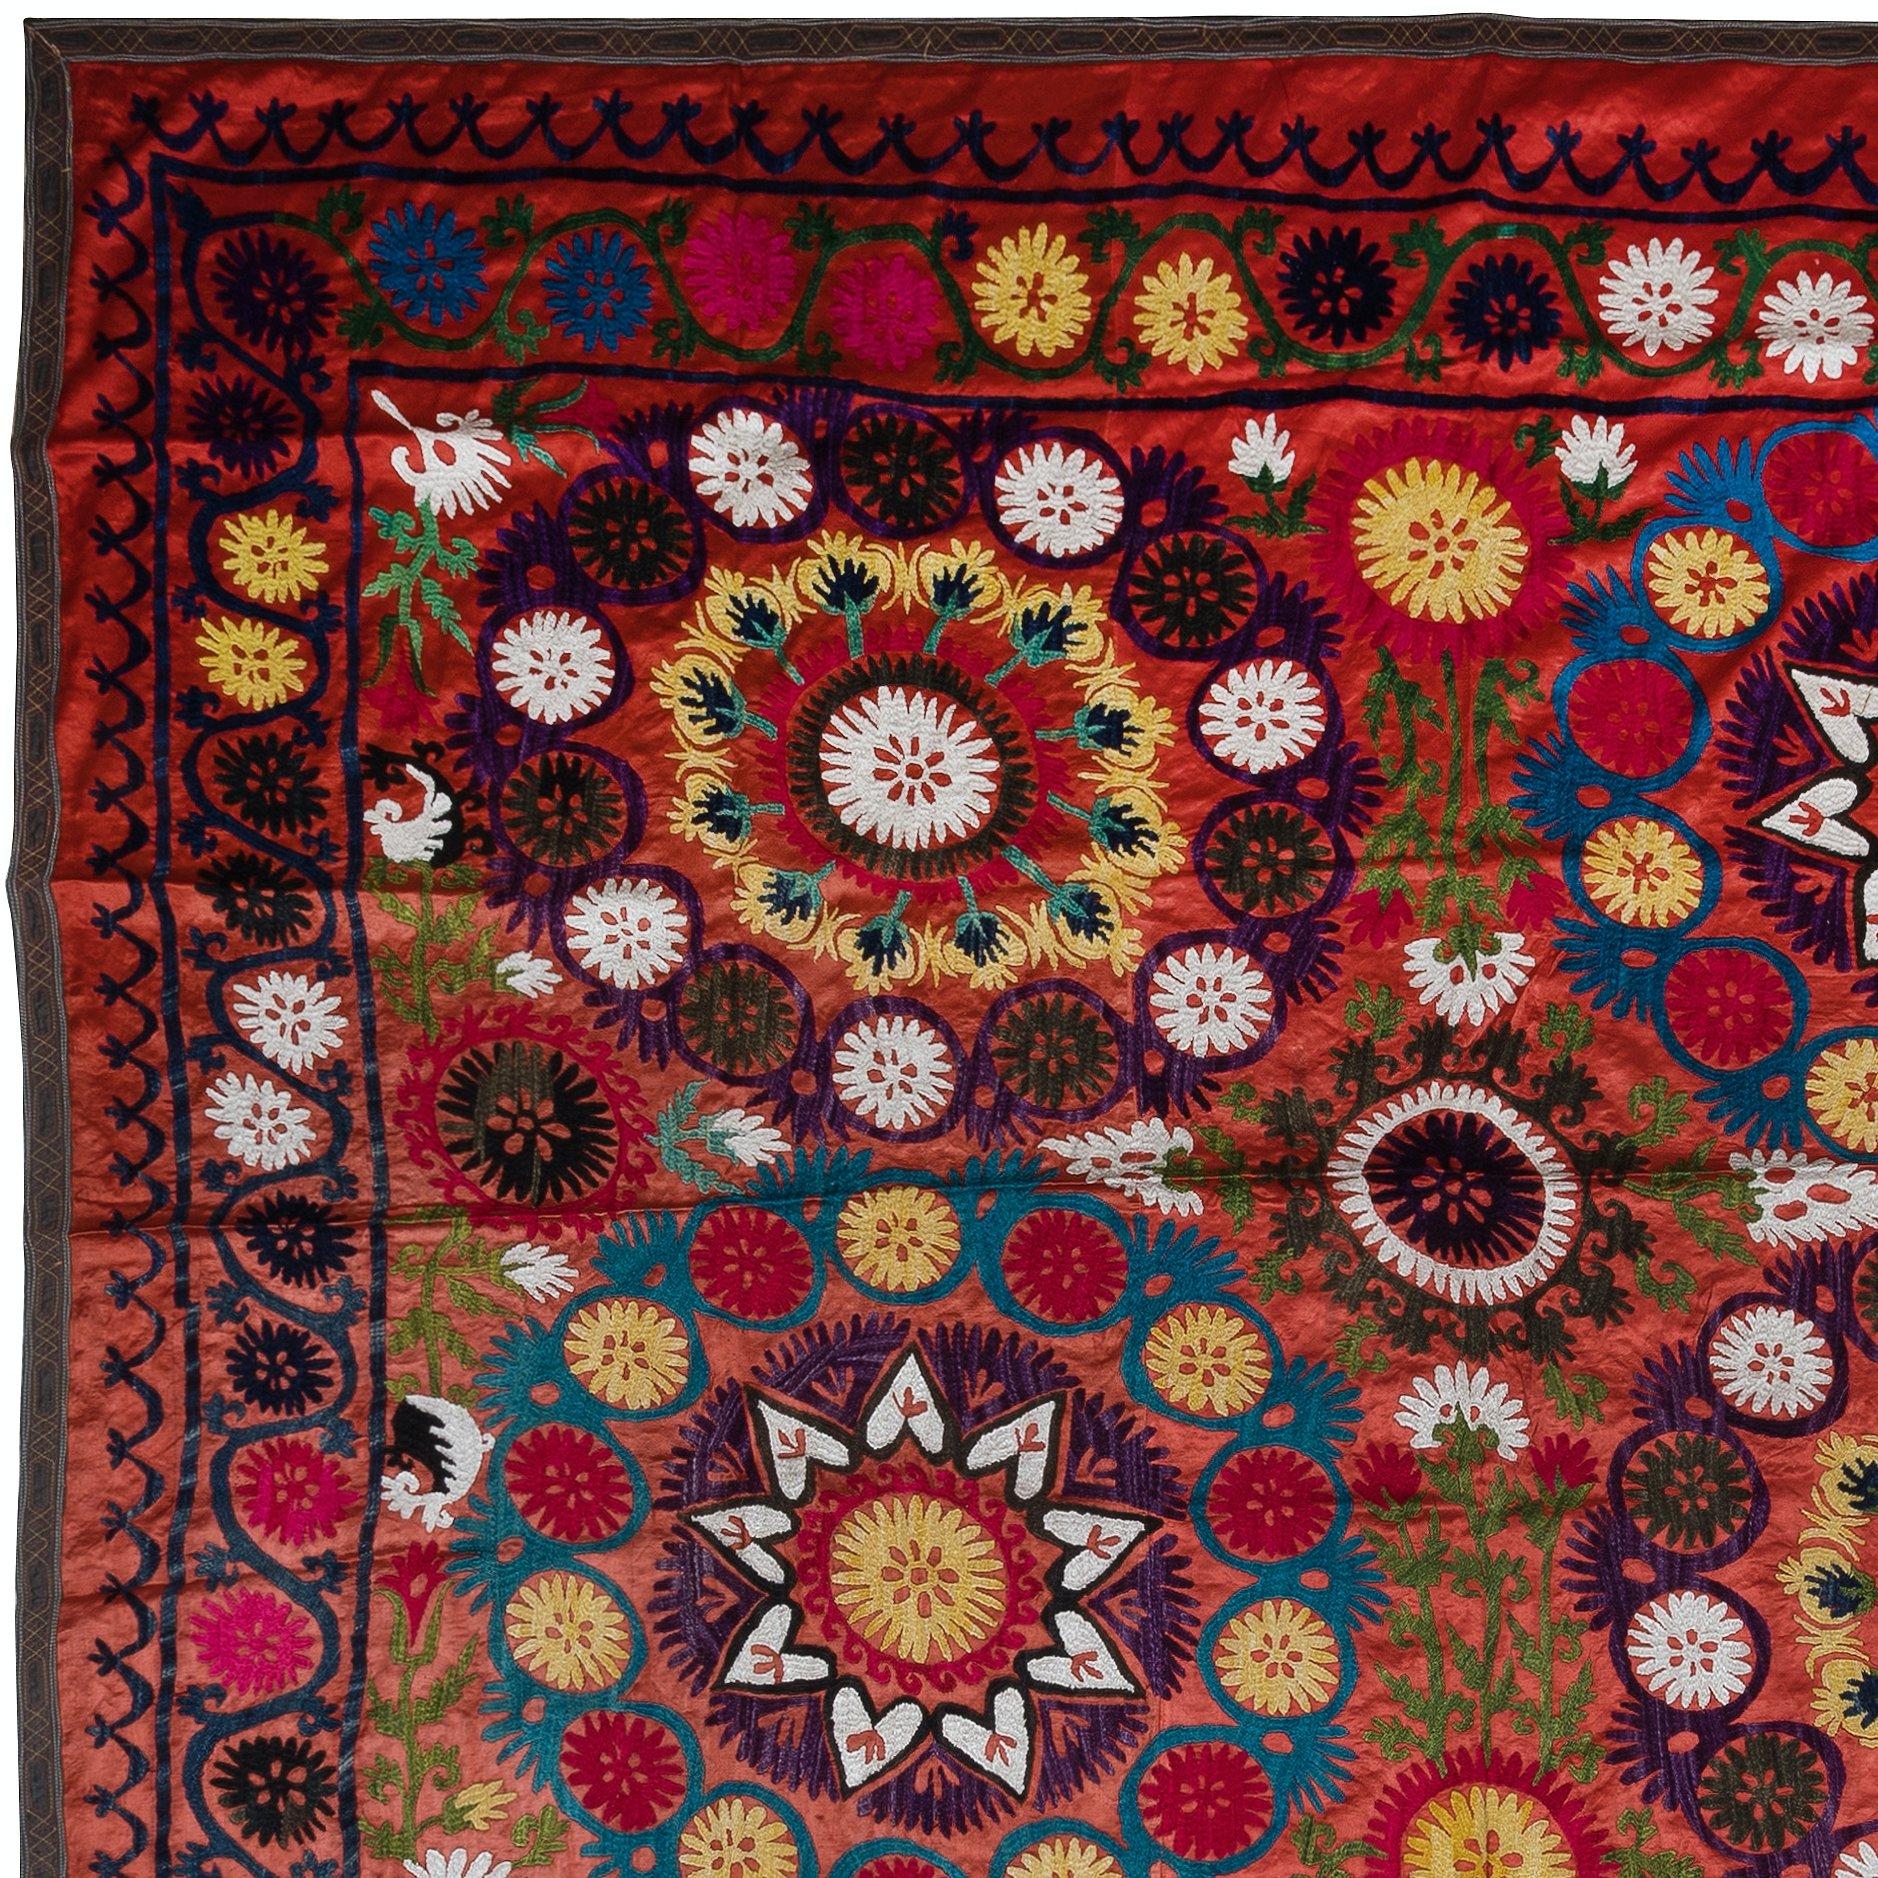 Suzani 5.8x7 ft Magnificent Silk Embroidery Wall Hanging, Wall Decor, Red Old Tapestry For Sale